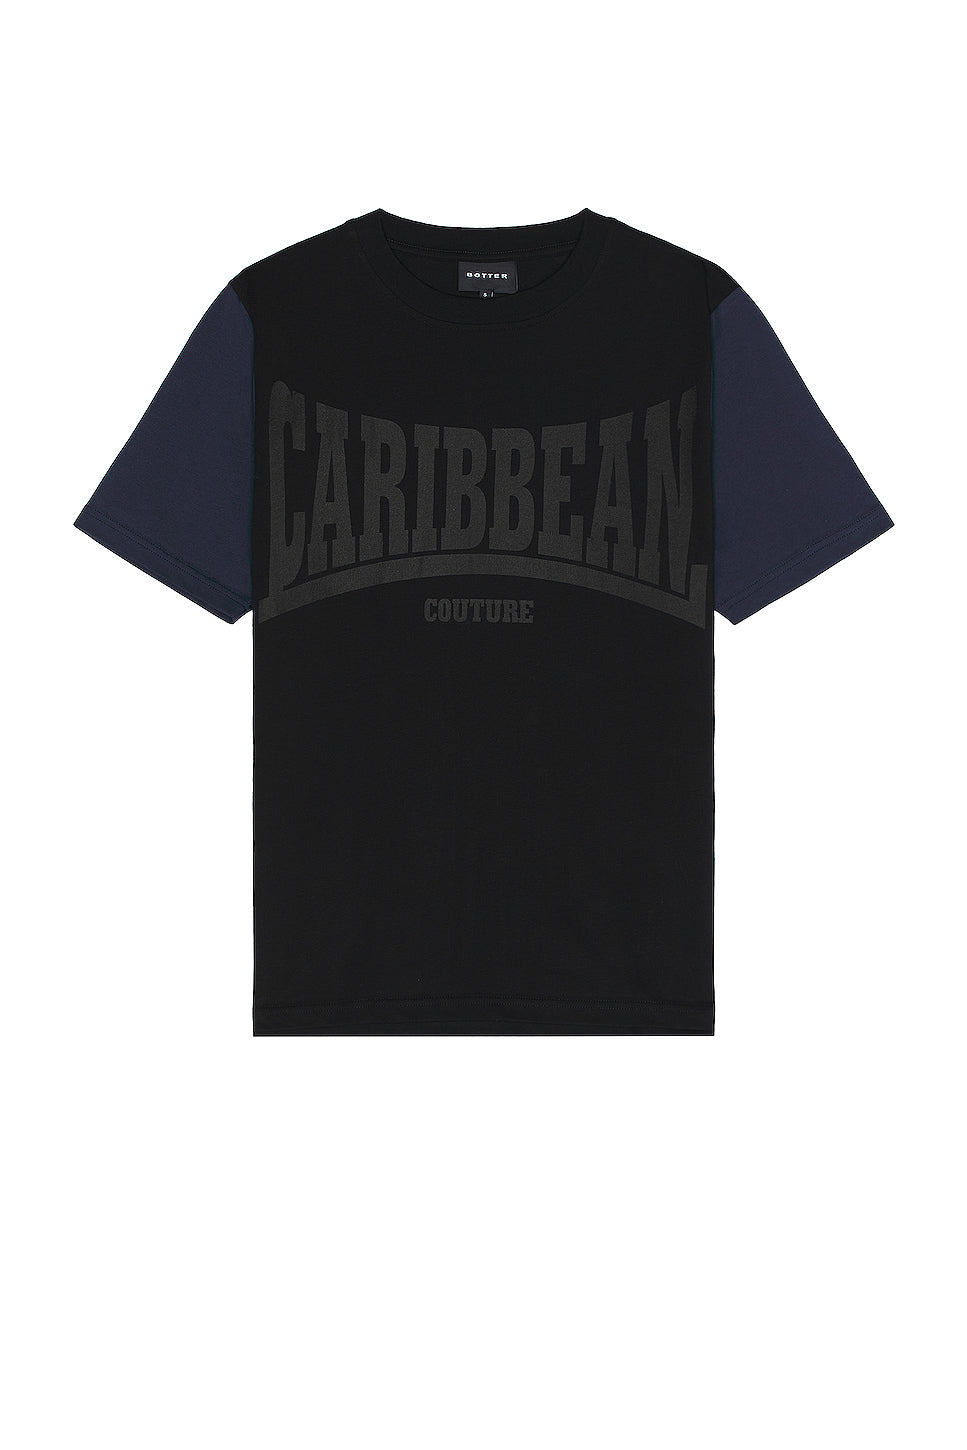 Caribbean Couture T-shirt